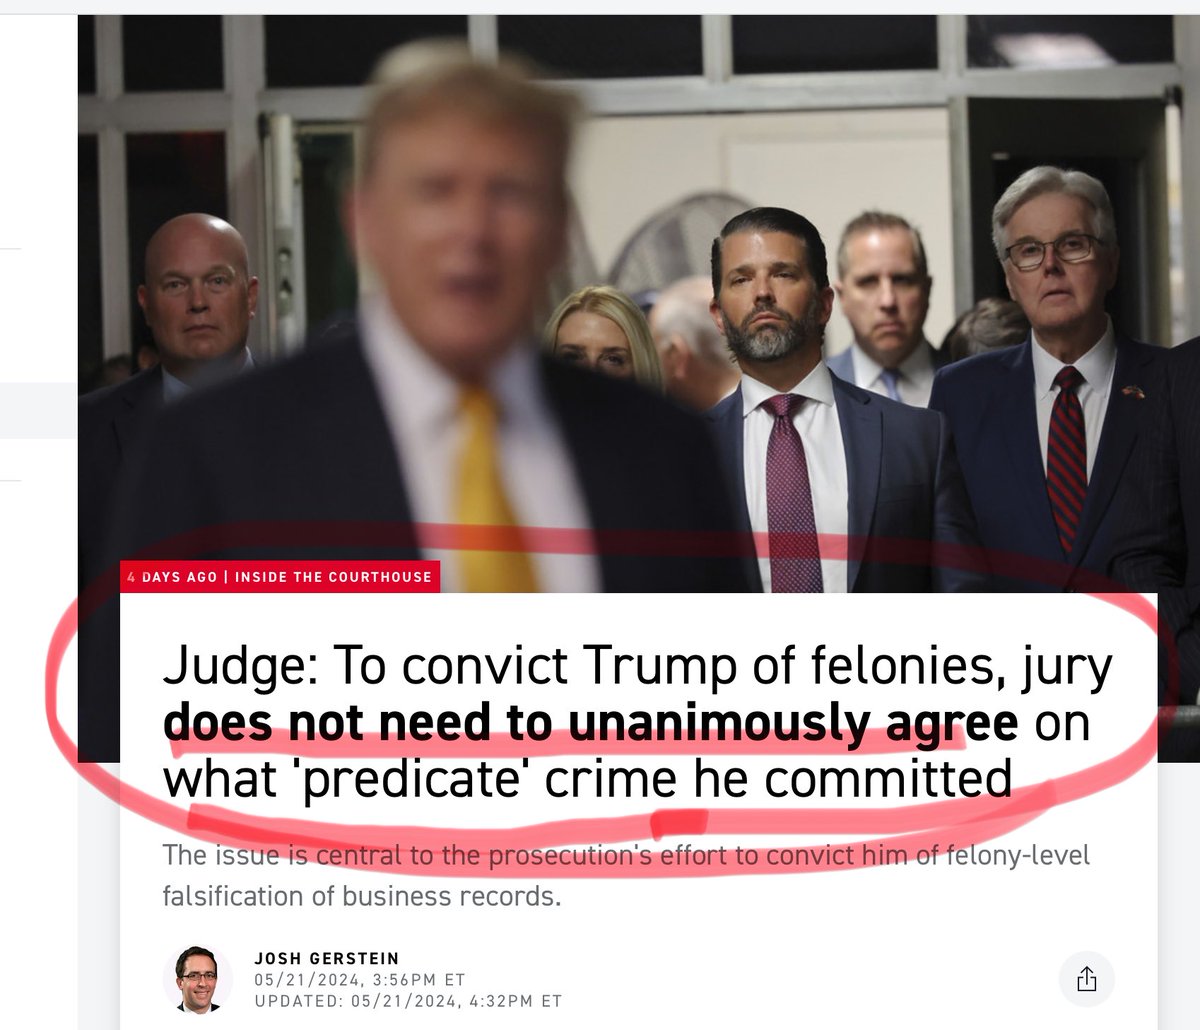 This is wrong-jury must be unanimous on every element (it can’t be 4 believe one predicate and 8 believe another); judge is wrong